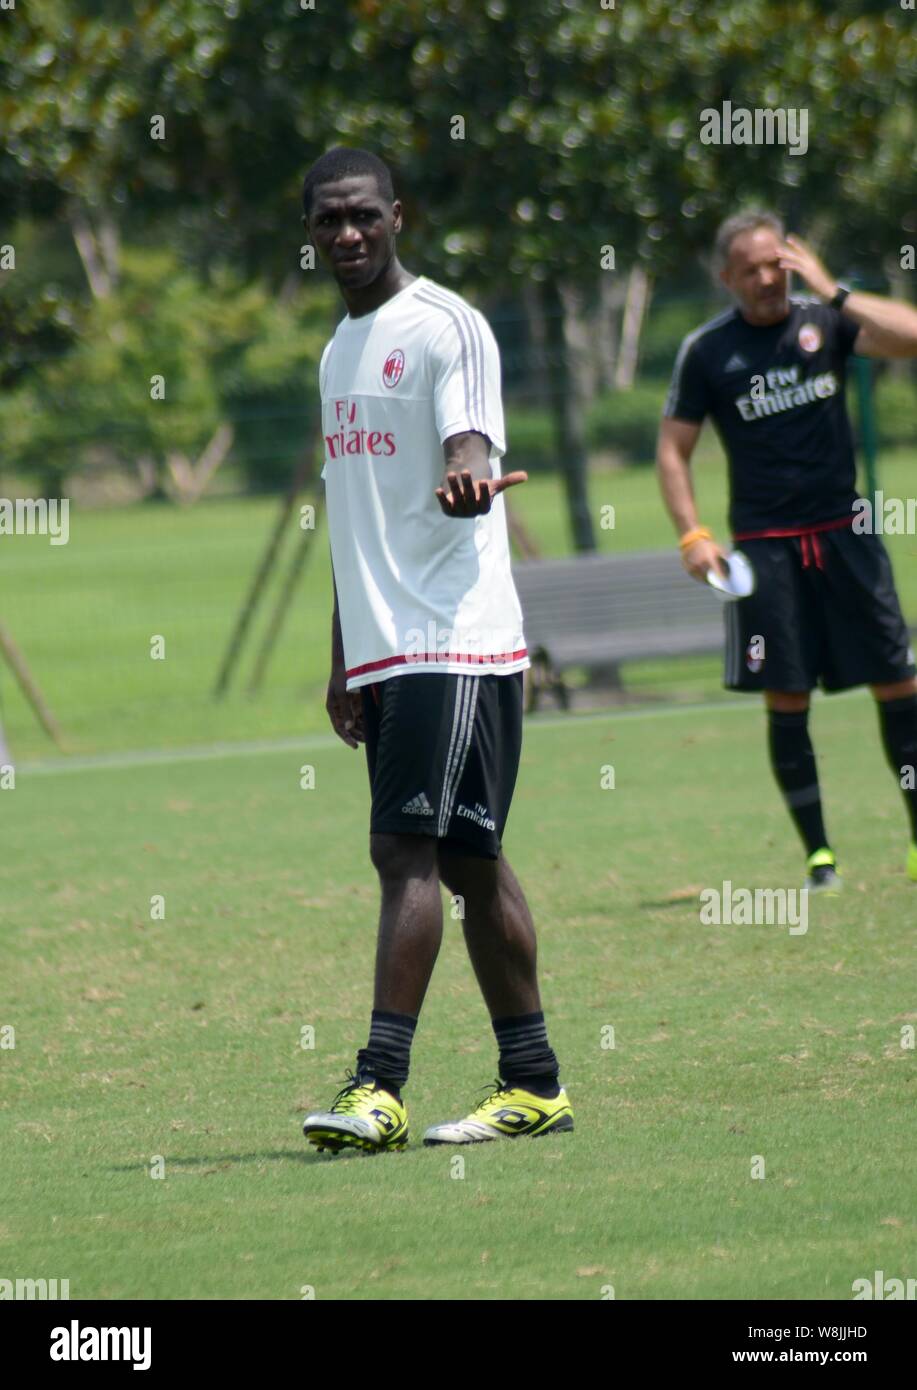 Cristian Eduardo Zapata Valencia, front, and teammates of AC Milan take part in a training session at the Century Park in Shanghai, China, 29 July 201 Stock Photo